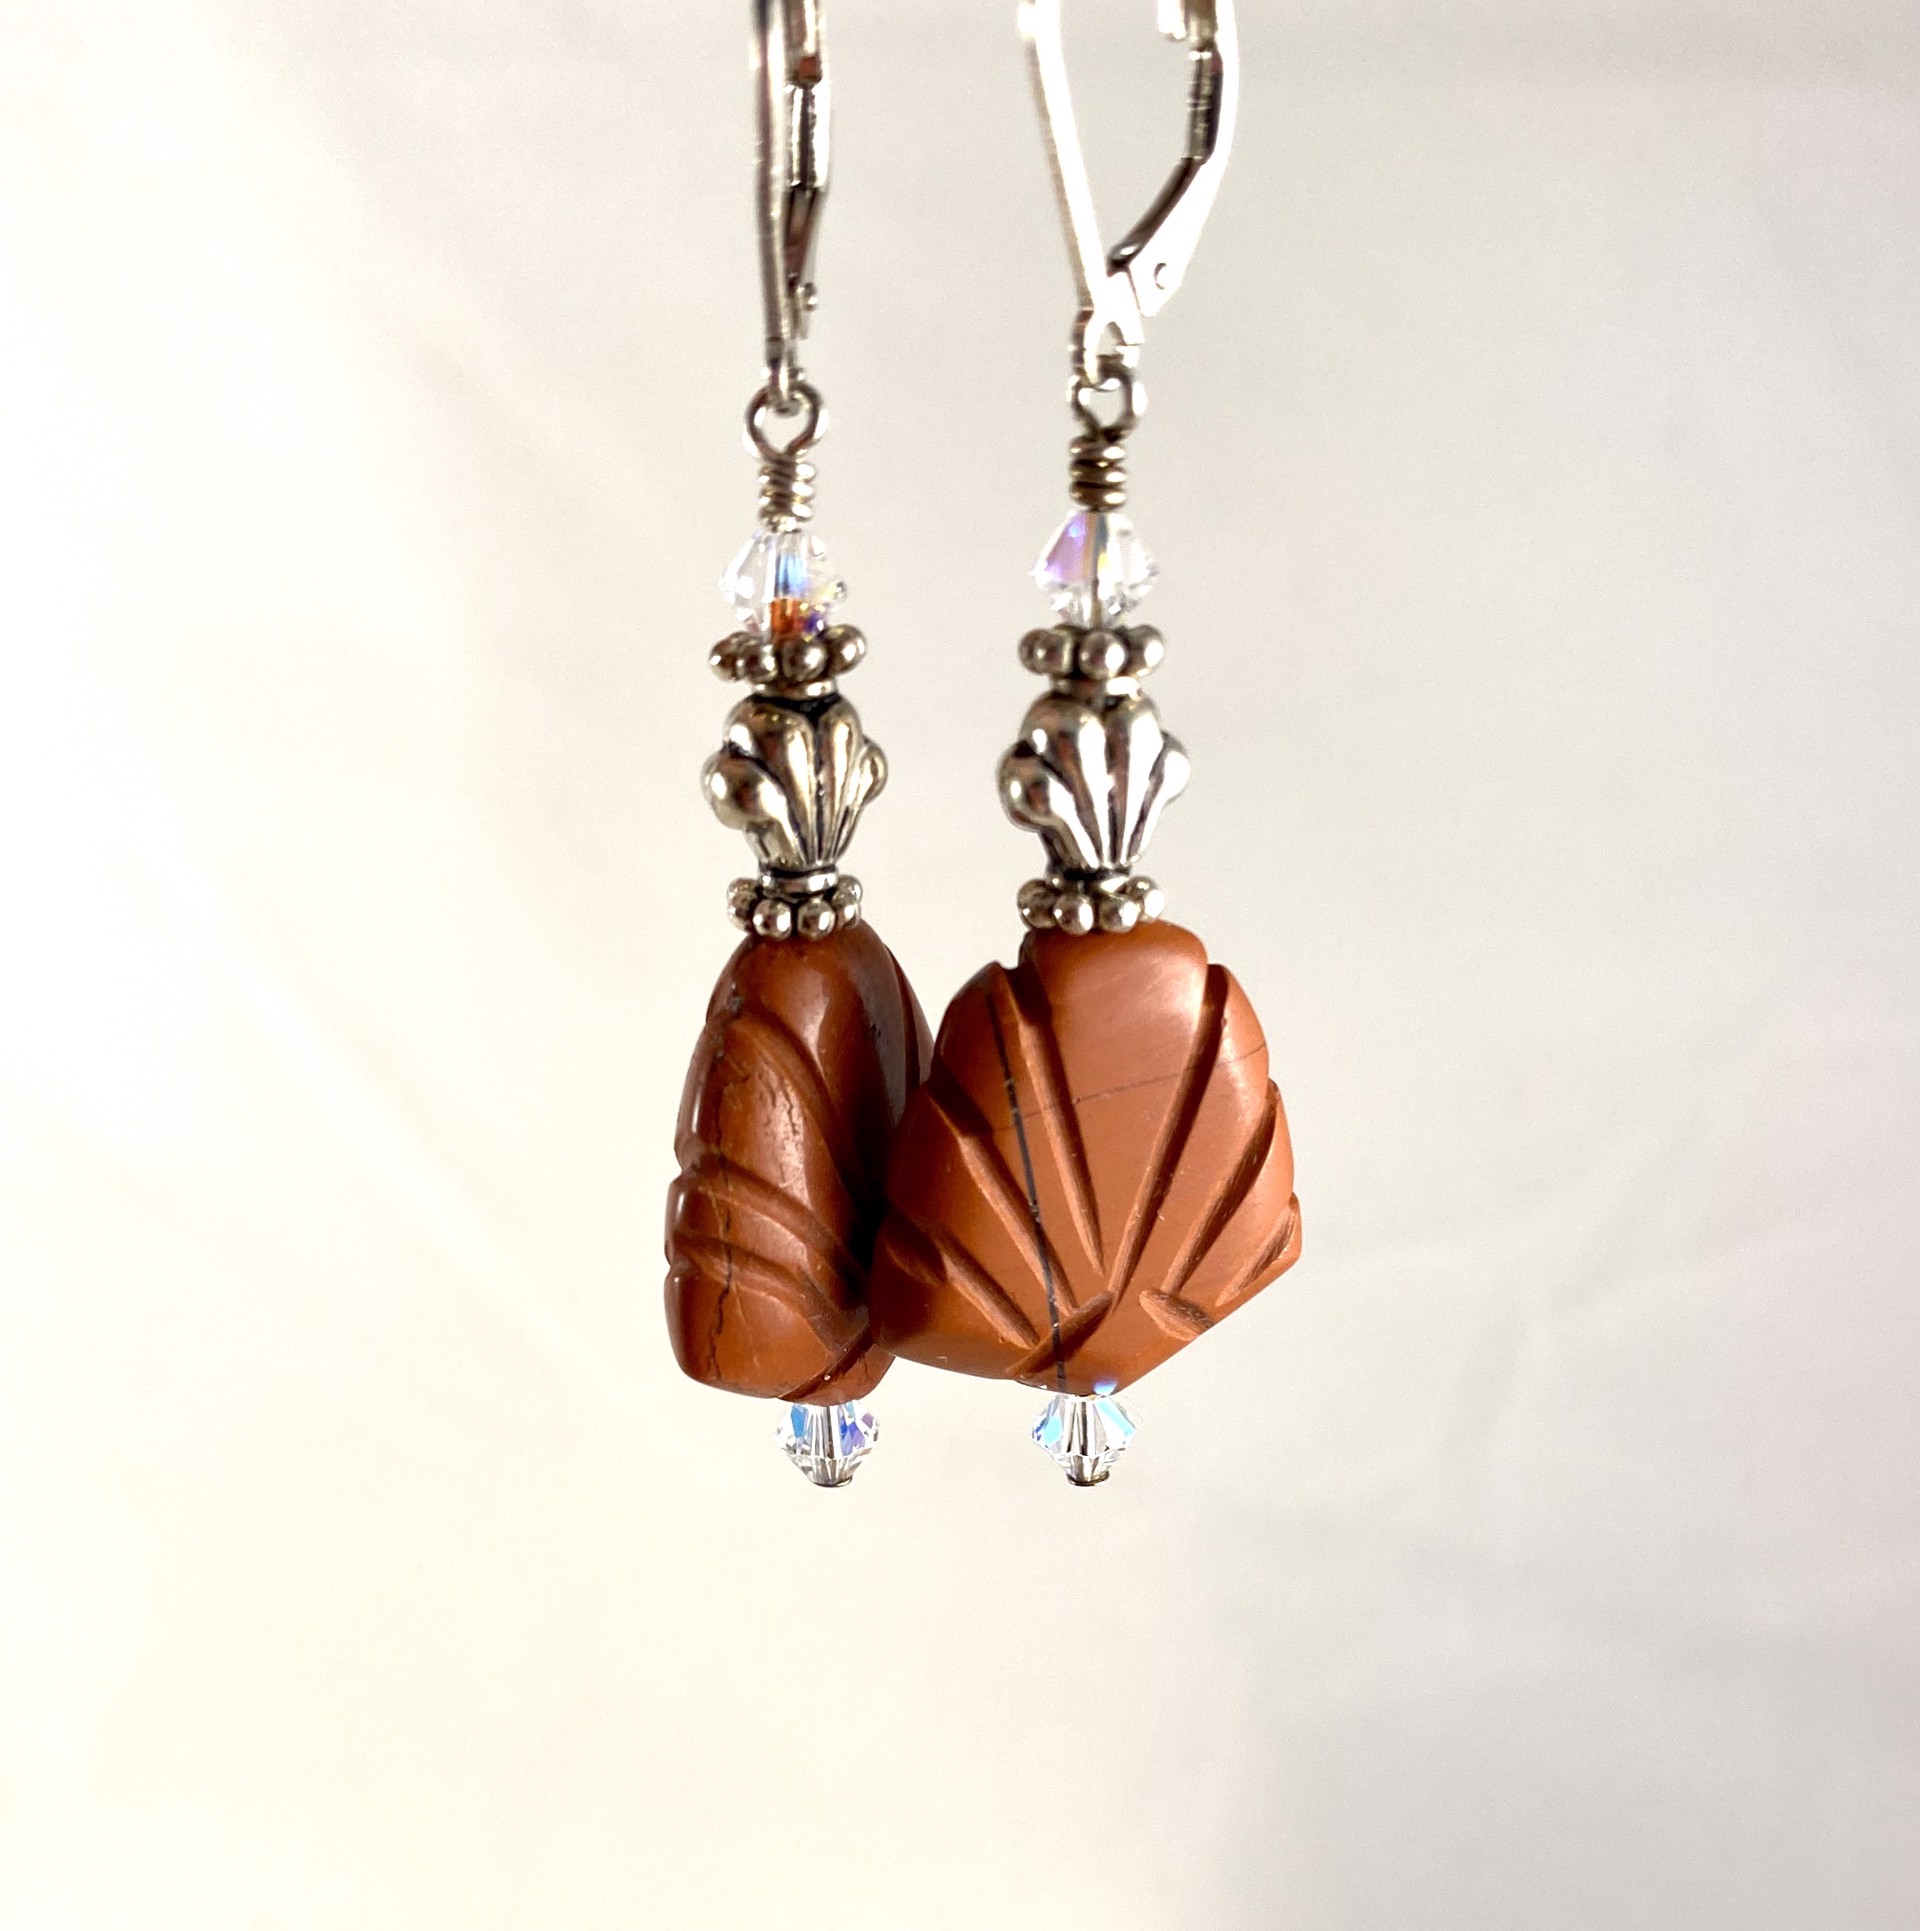 Carved Red Agate Crystal Earrings SHOSH19-19 by Shoshannah Weinisch